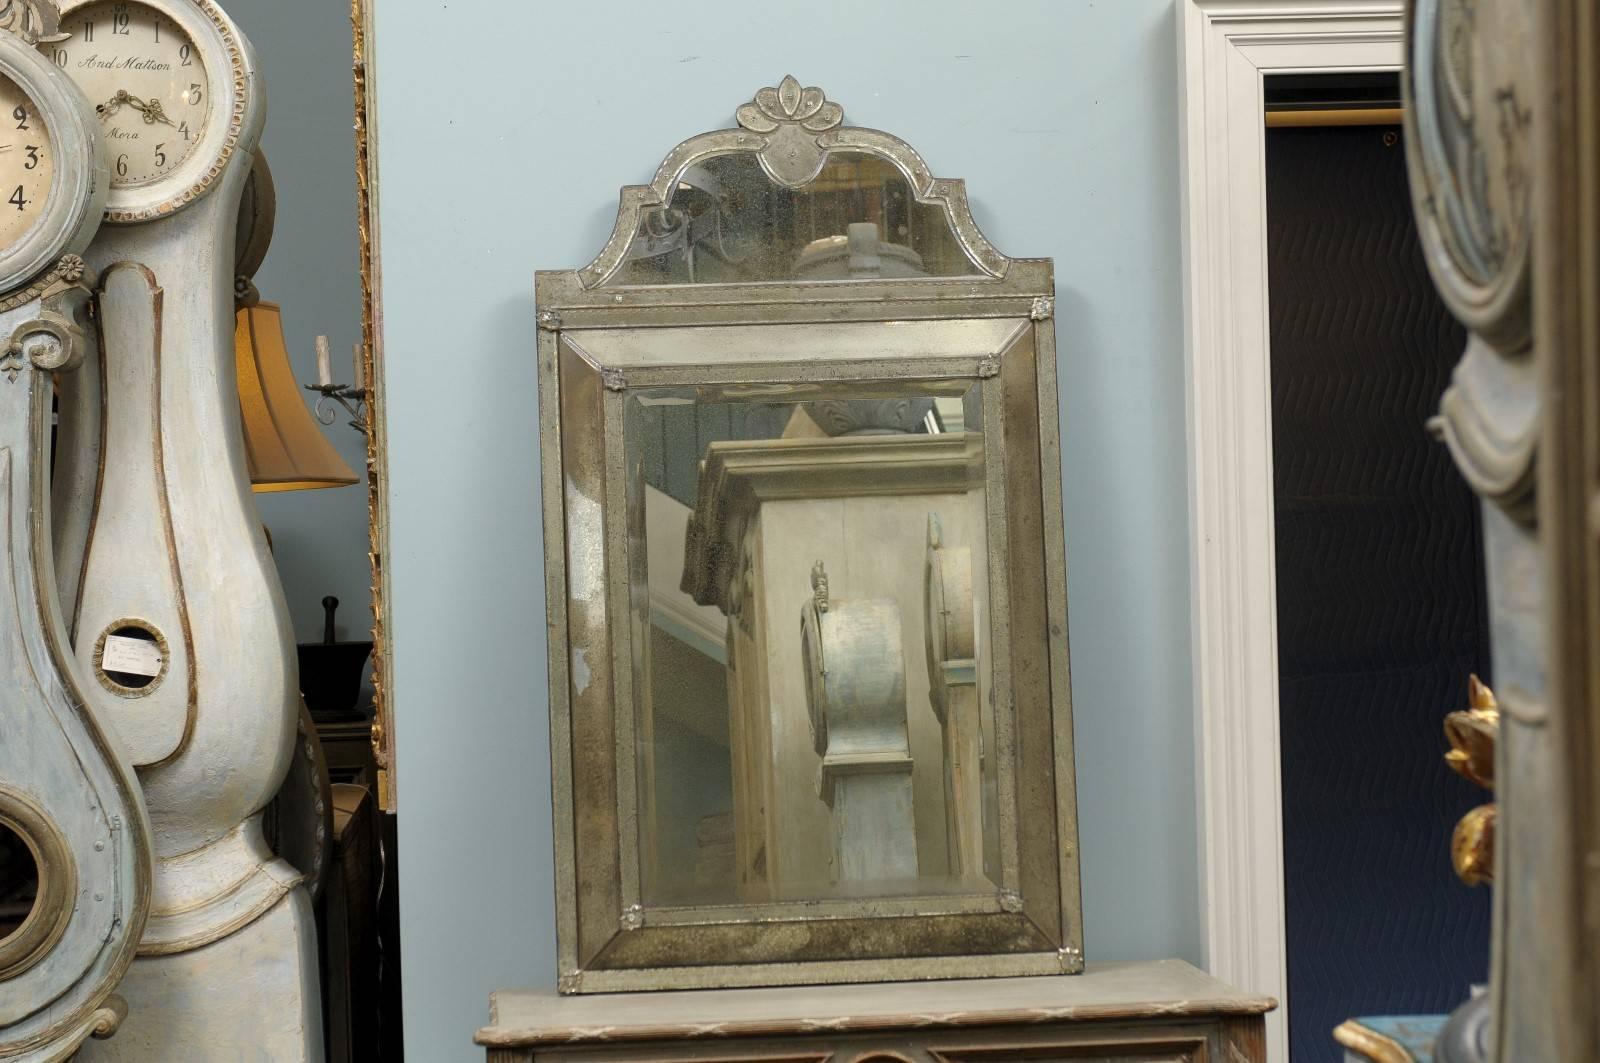 Contemporary Crest Top Venetian Style Antiqued Rectangular Mirror, Handmade and Hand Silvered